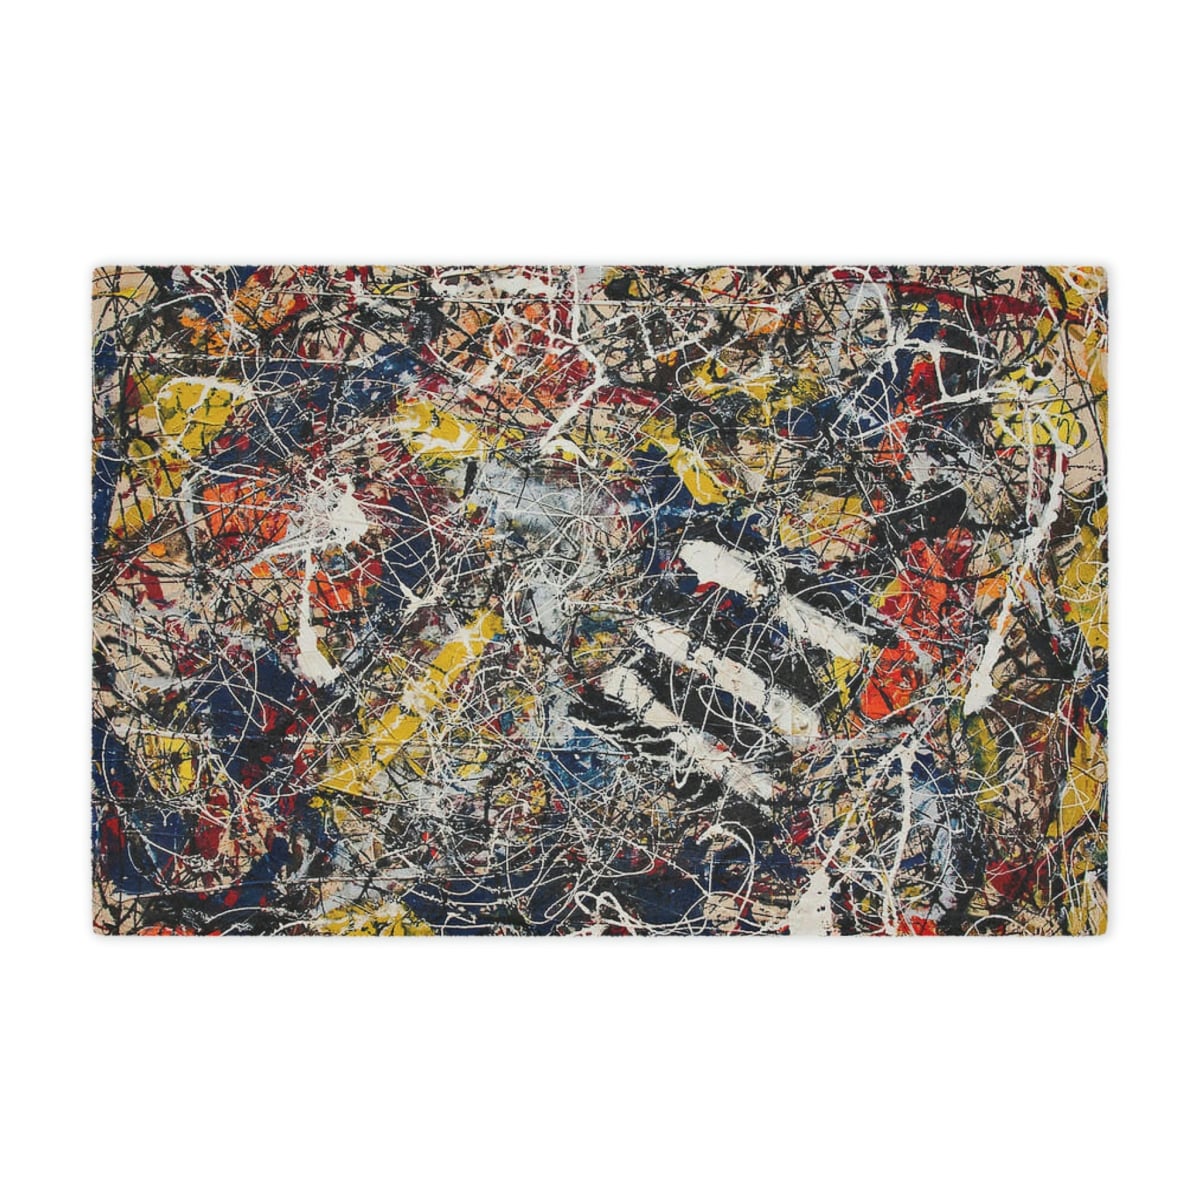 Iconic Jackson Pollock Painting on a Blanket